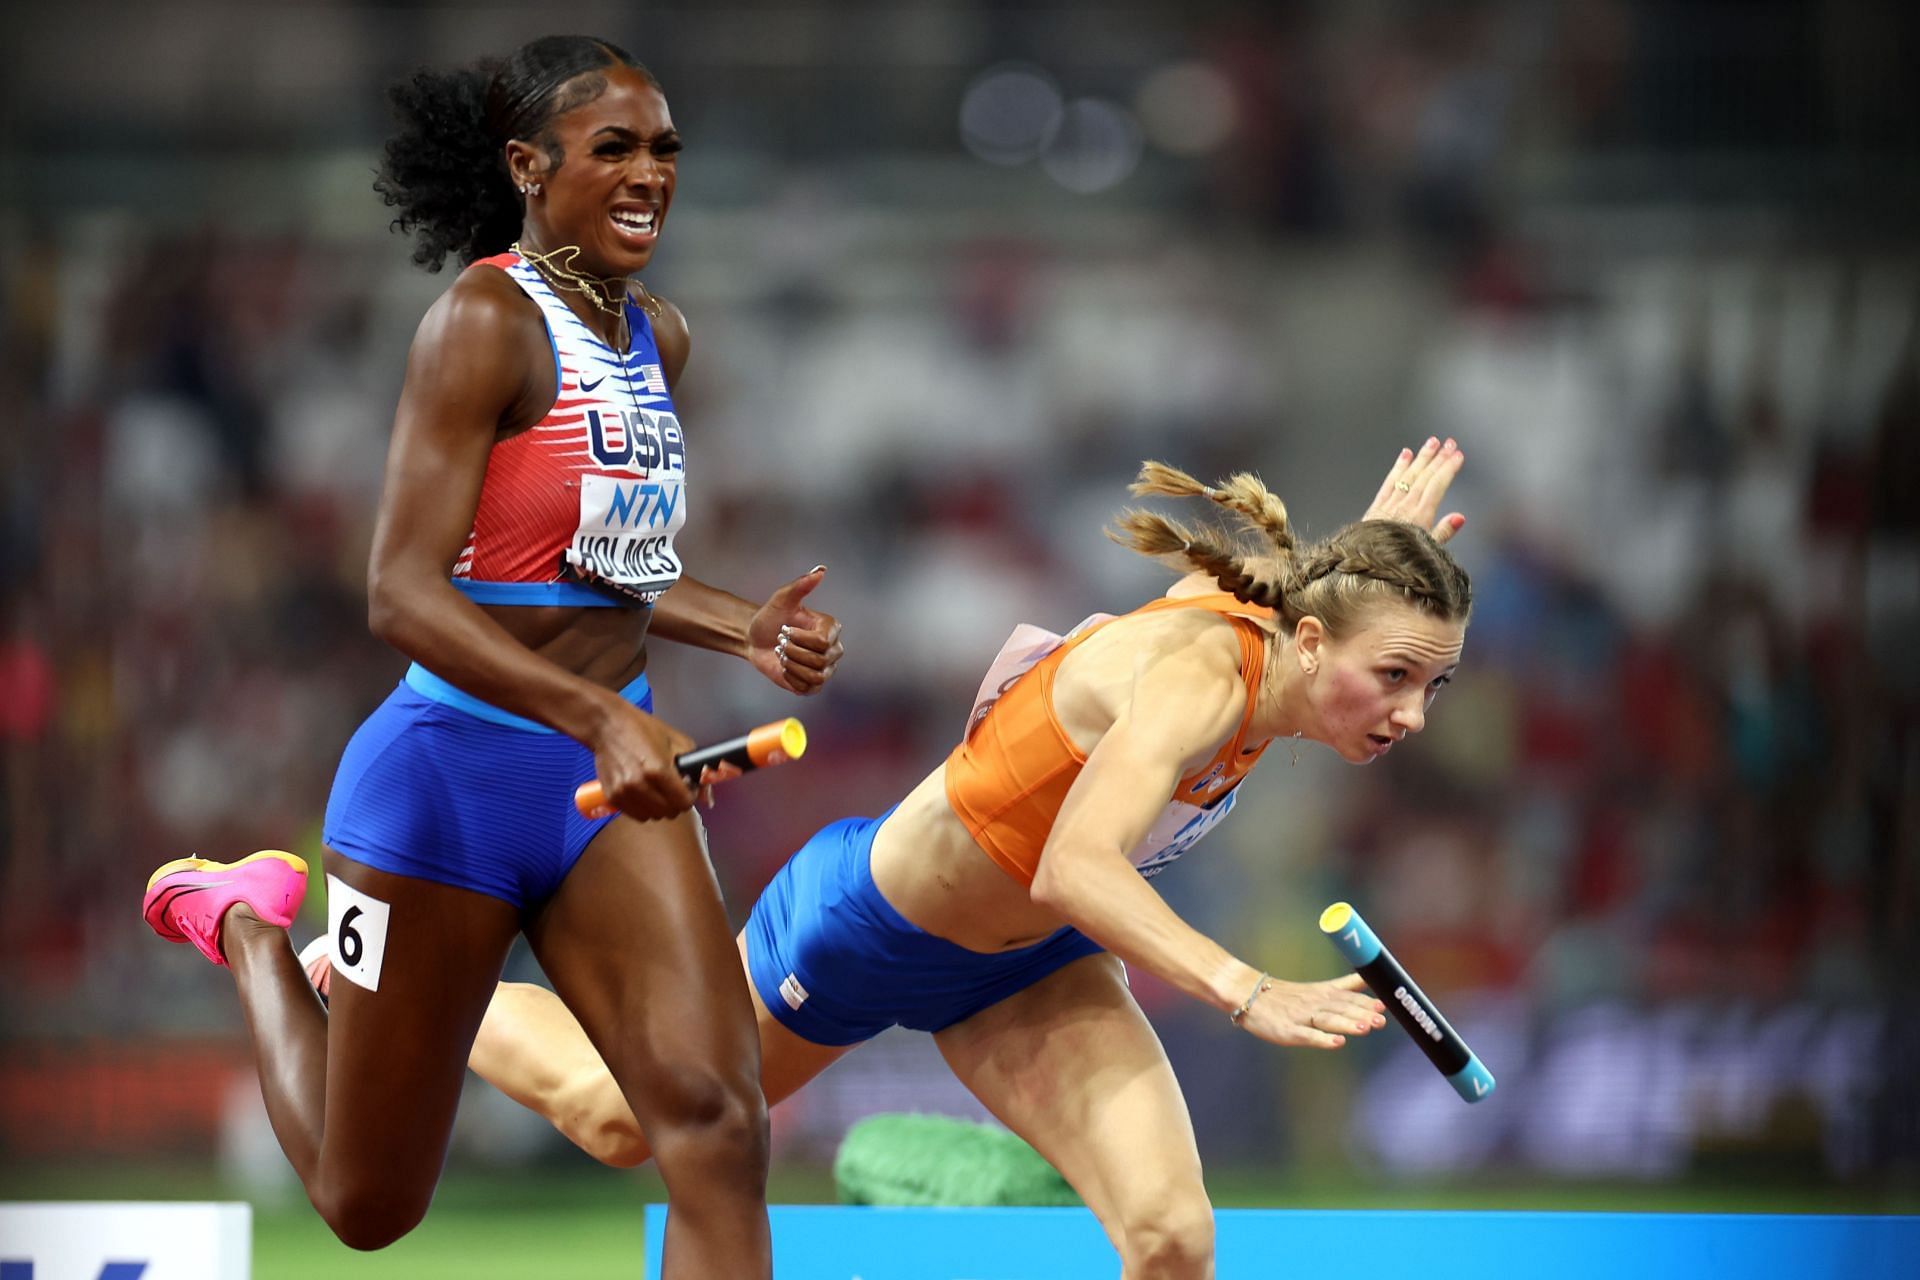 Alexis Holmes of Team United States crosses the finish line to win the 4x400m Mixed Relay Final as Femke Bol falls during the 2023 World Athletics Championships in Budapest, Hungary.